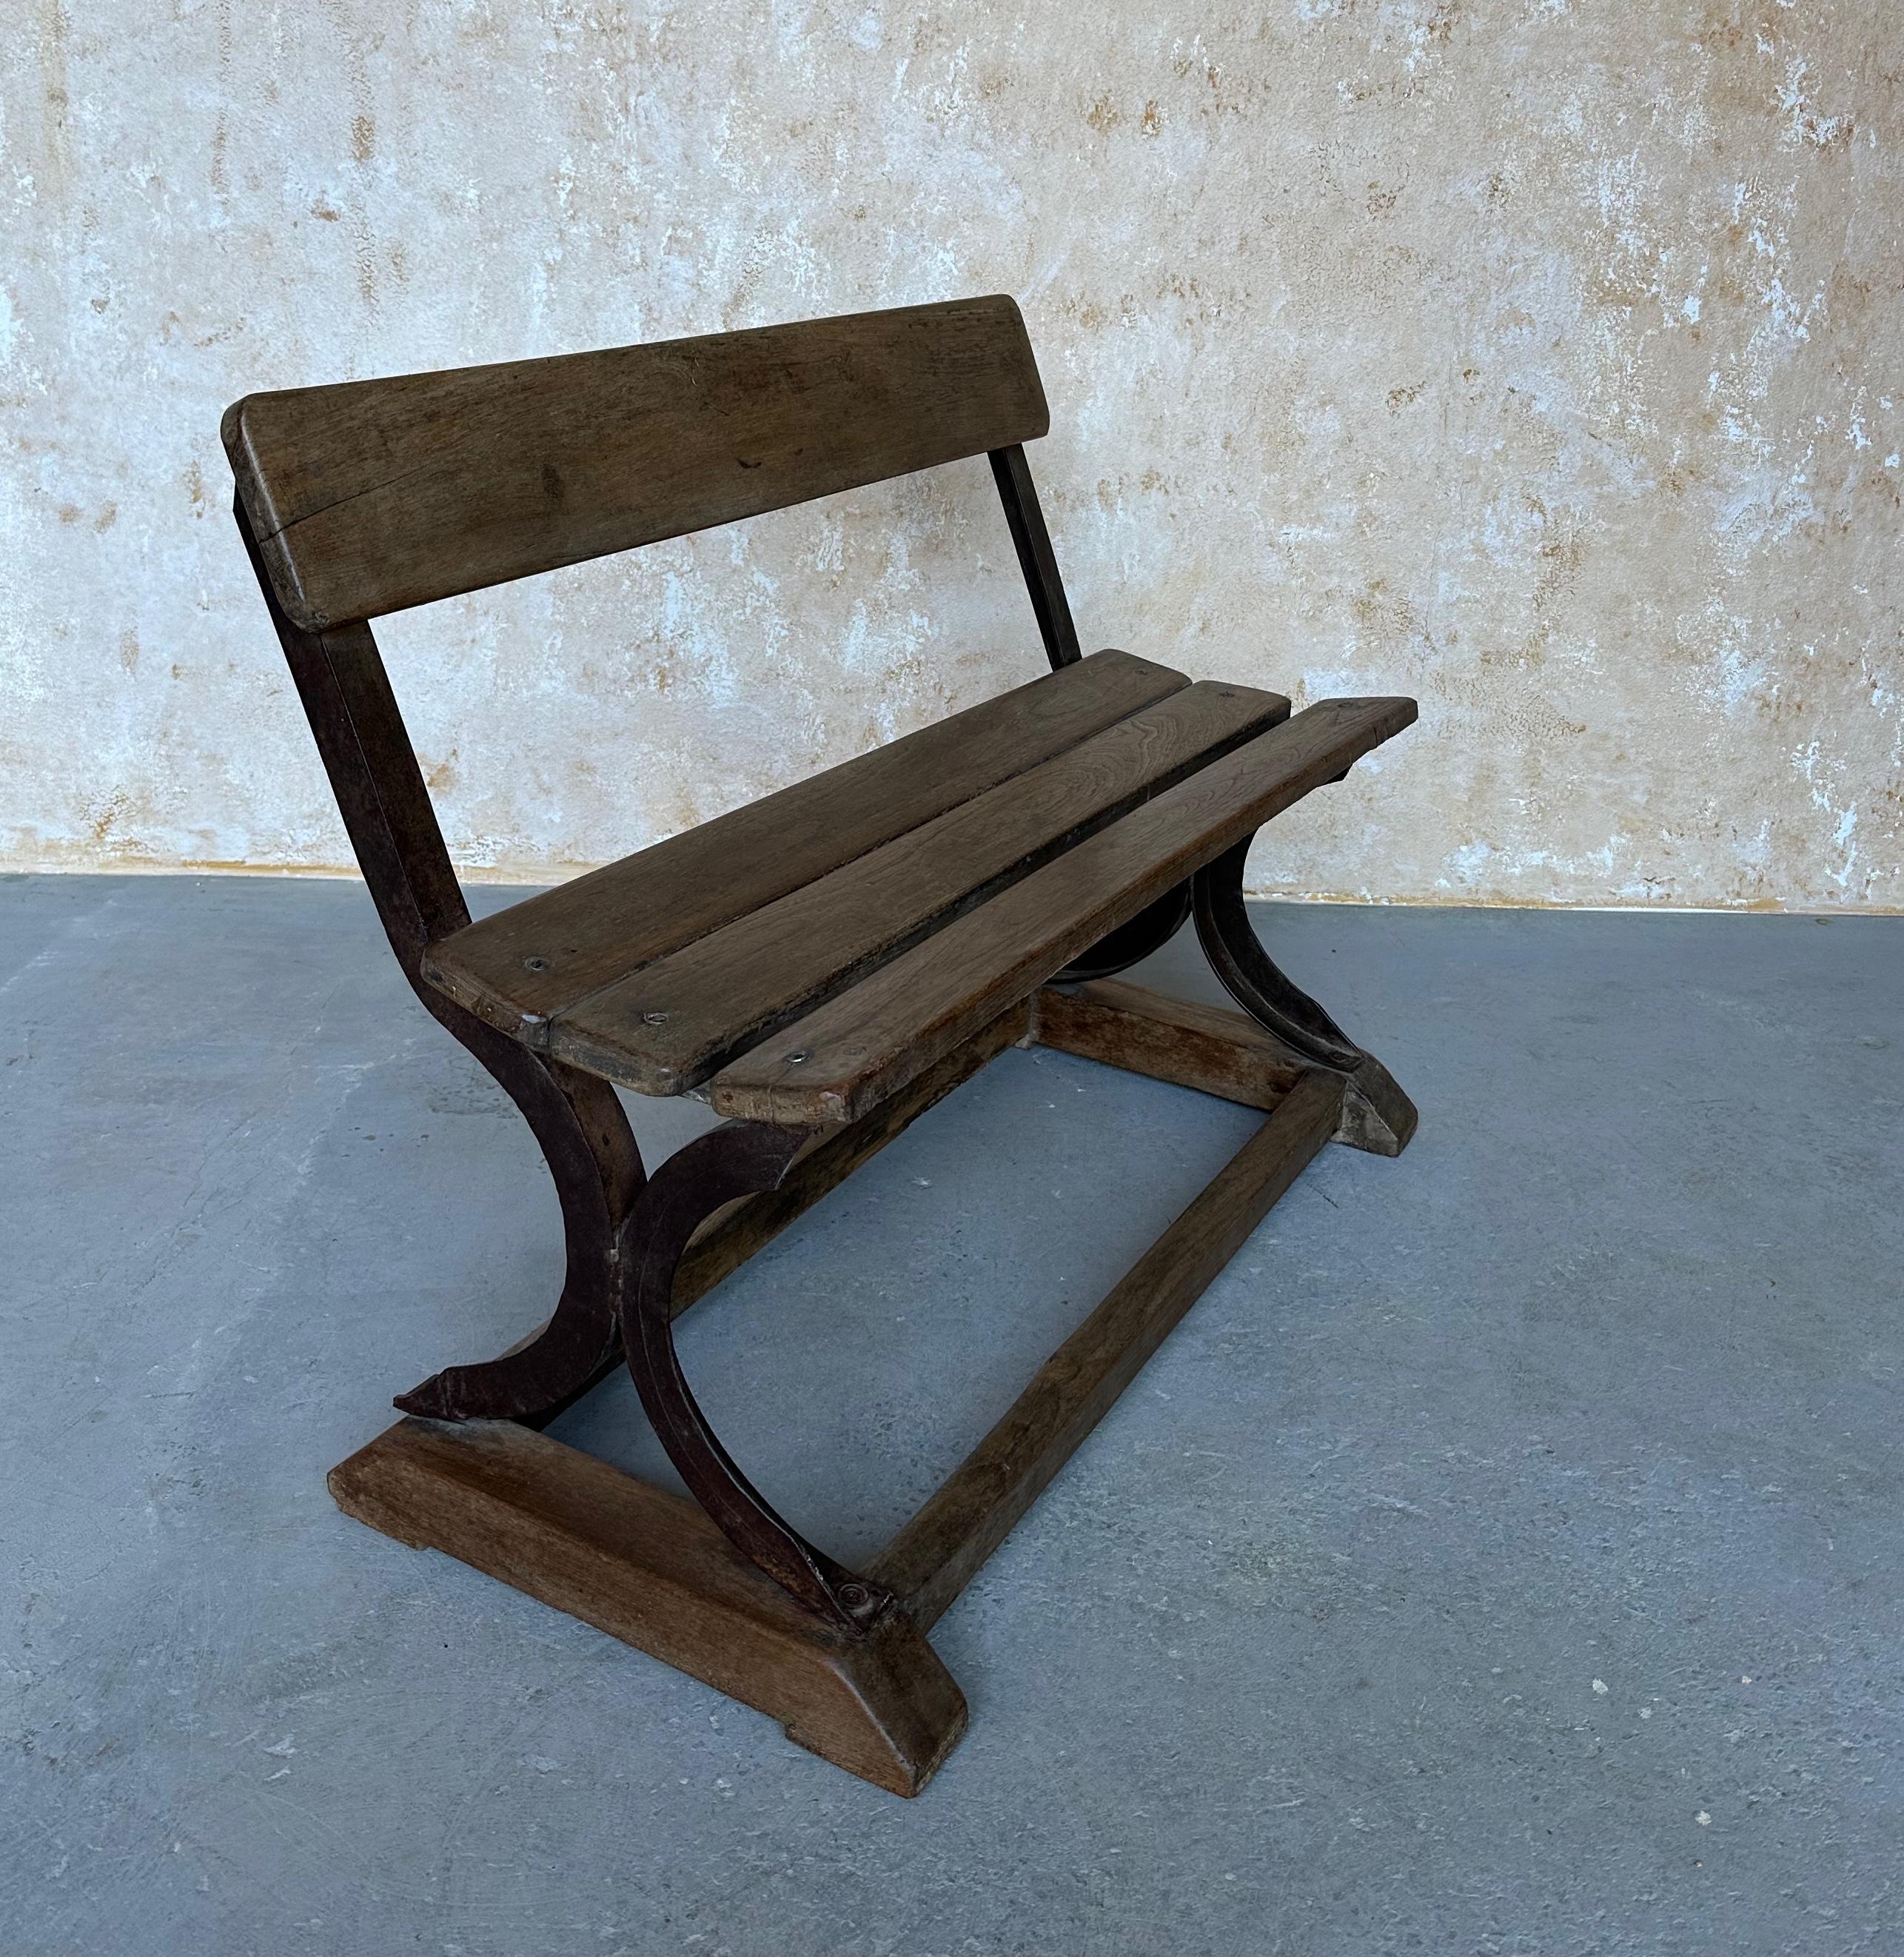 A very unusual small scaled wood and iron bench. Add a unique touch to any space with this vintage wood and iron bench. Boasting a beautiful aged patina, this early 20th century piece is sure to draw attention in any area. While it may have